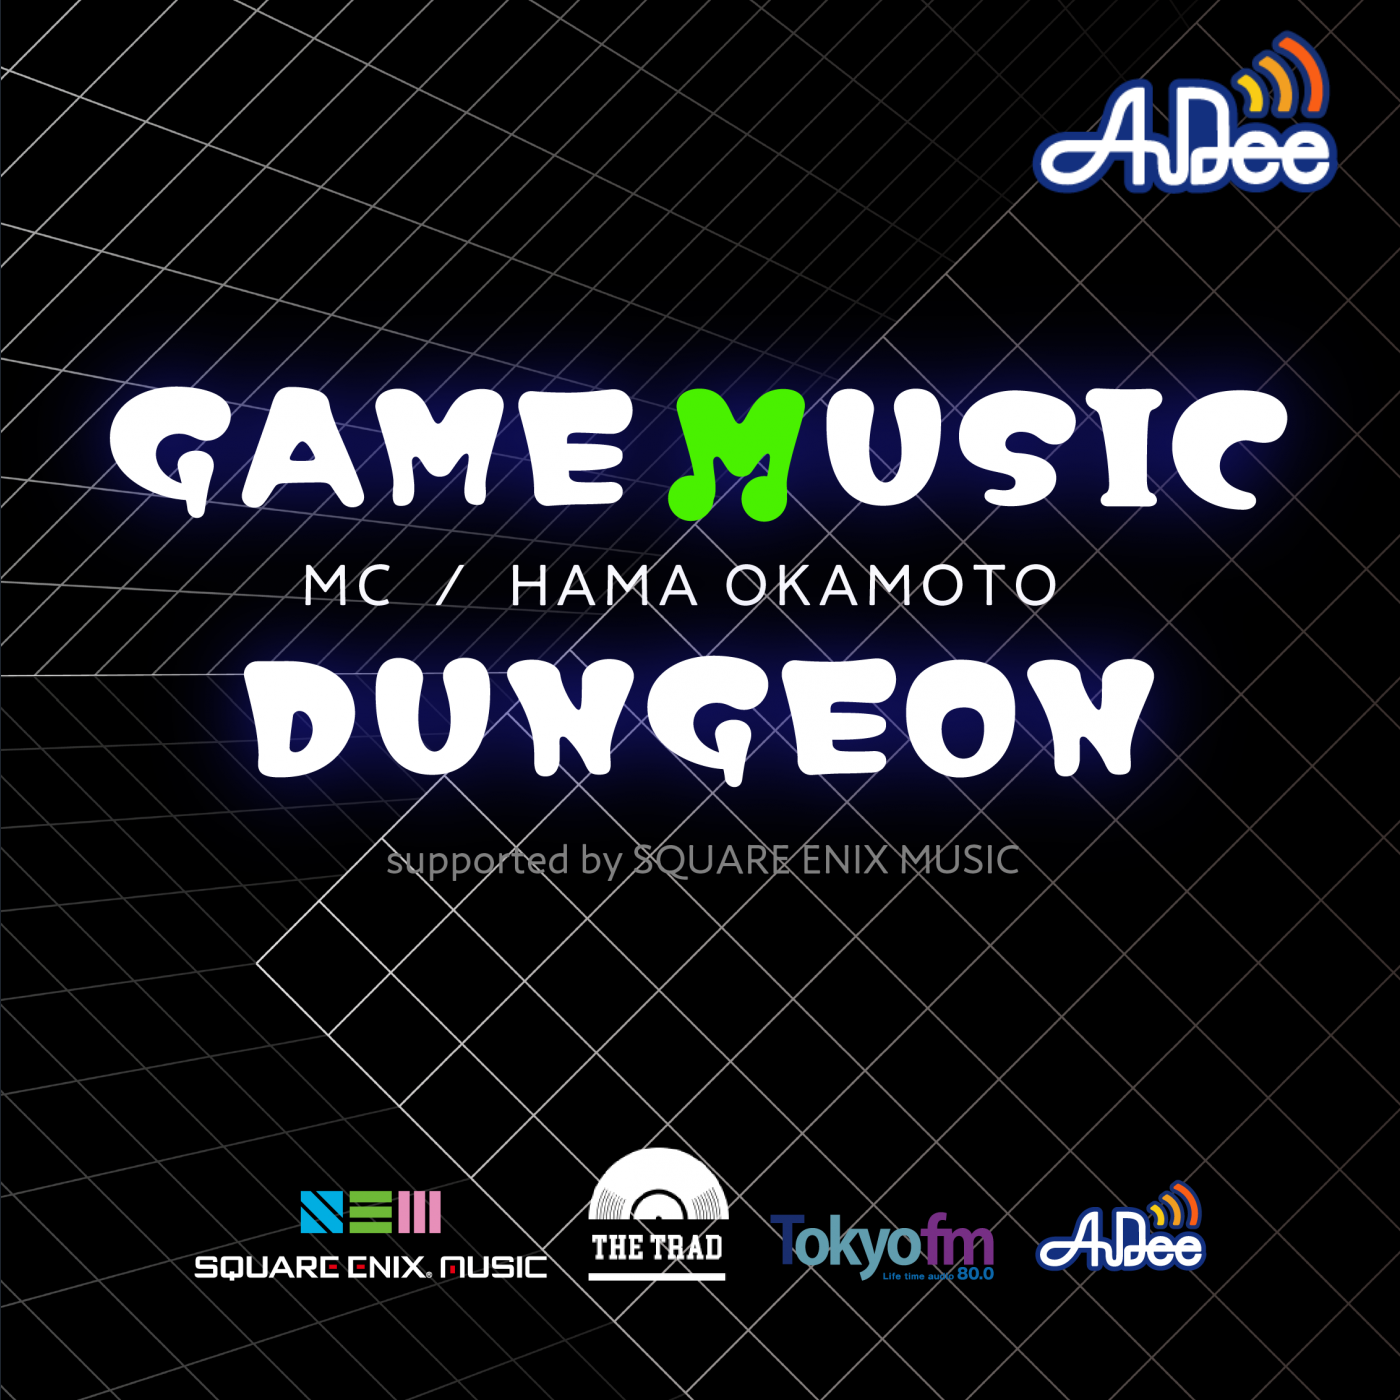 GAME MUSIC DUNGEON supported by SQUARE ENIX MUSIC|【6/28(水)OA 